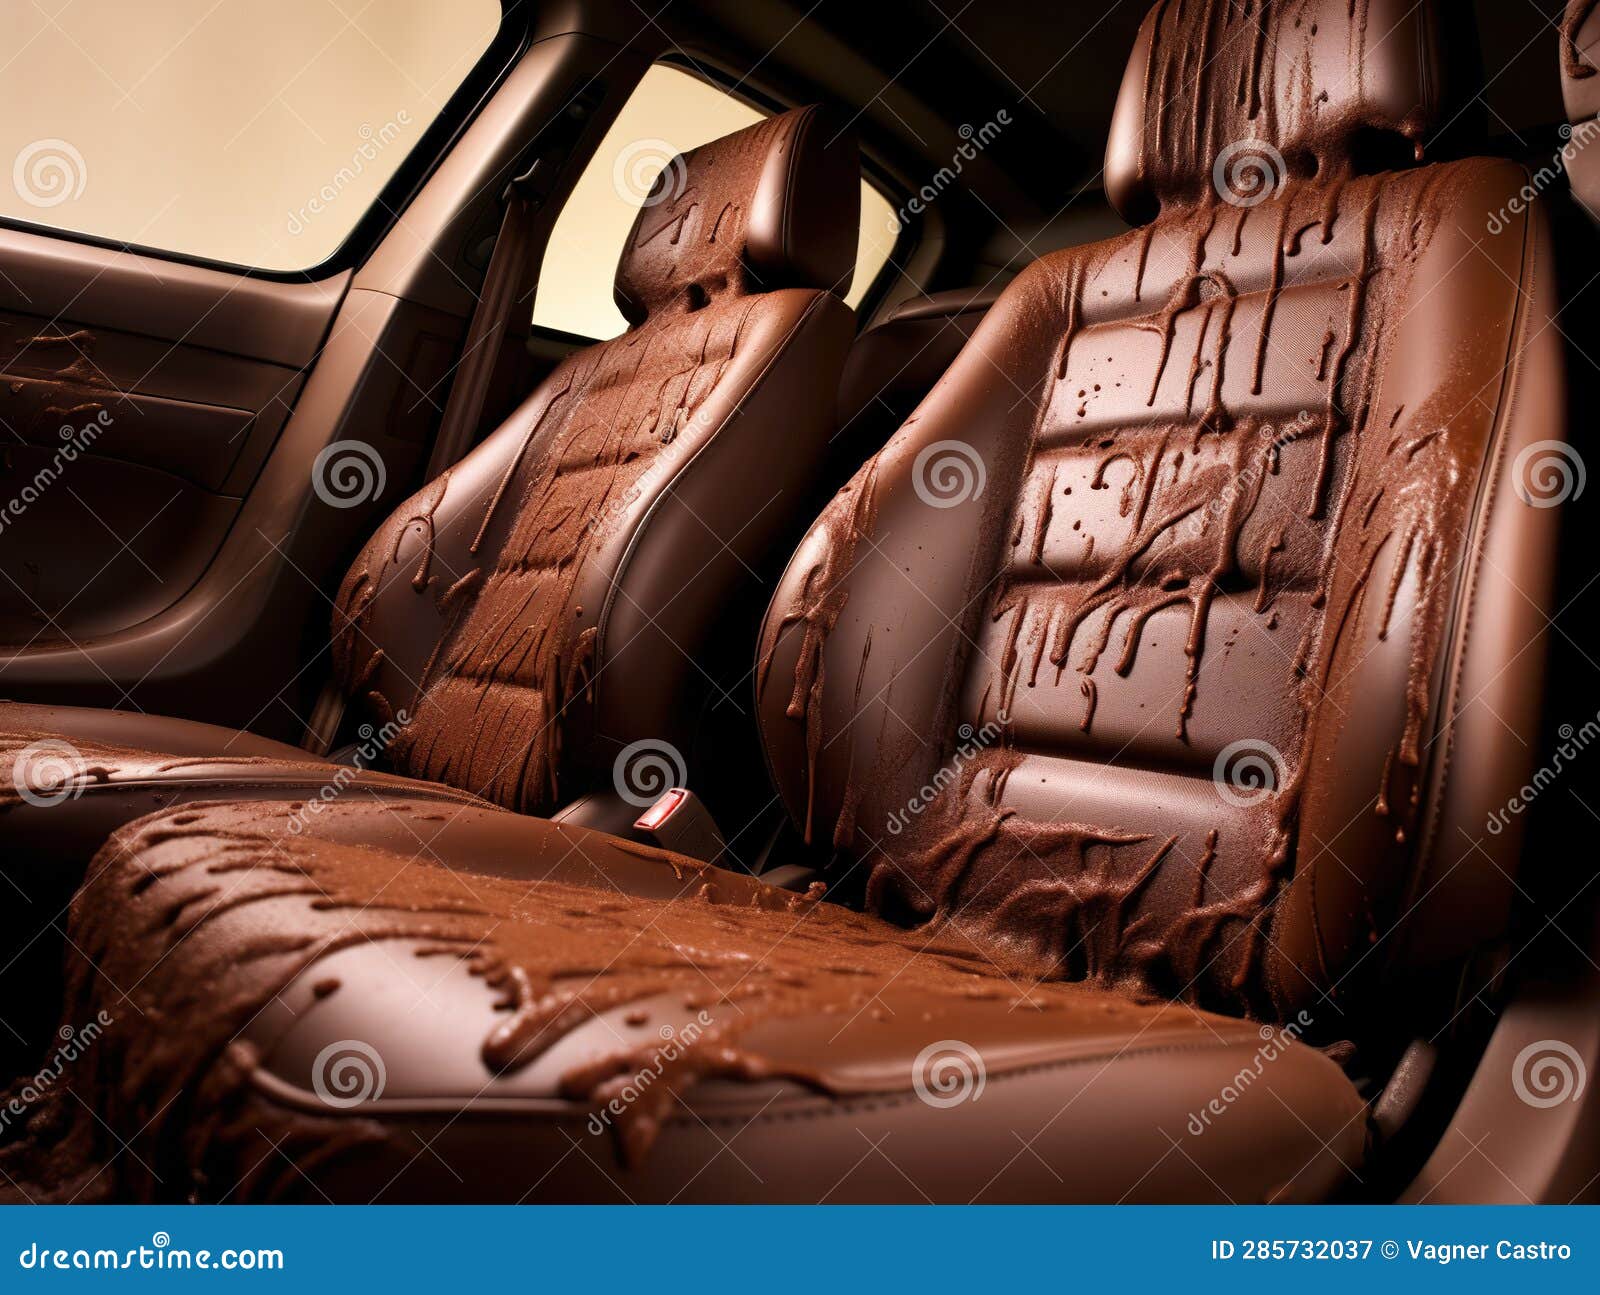 car seats in full chocolate honeydew leathers throughout the car.